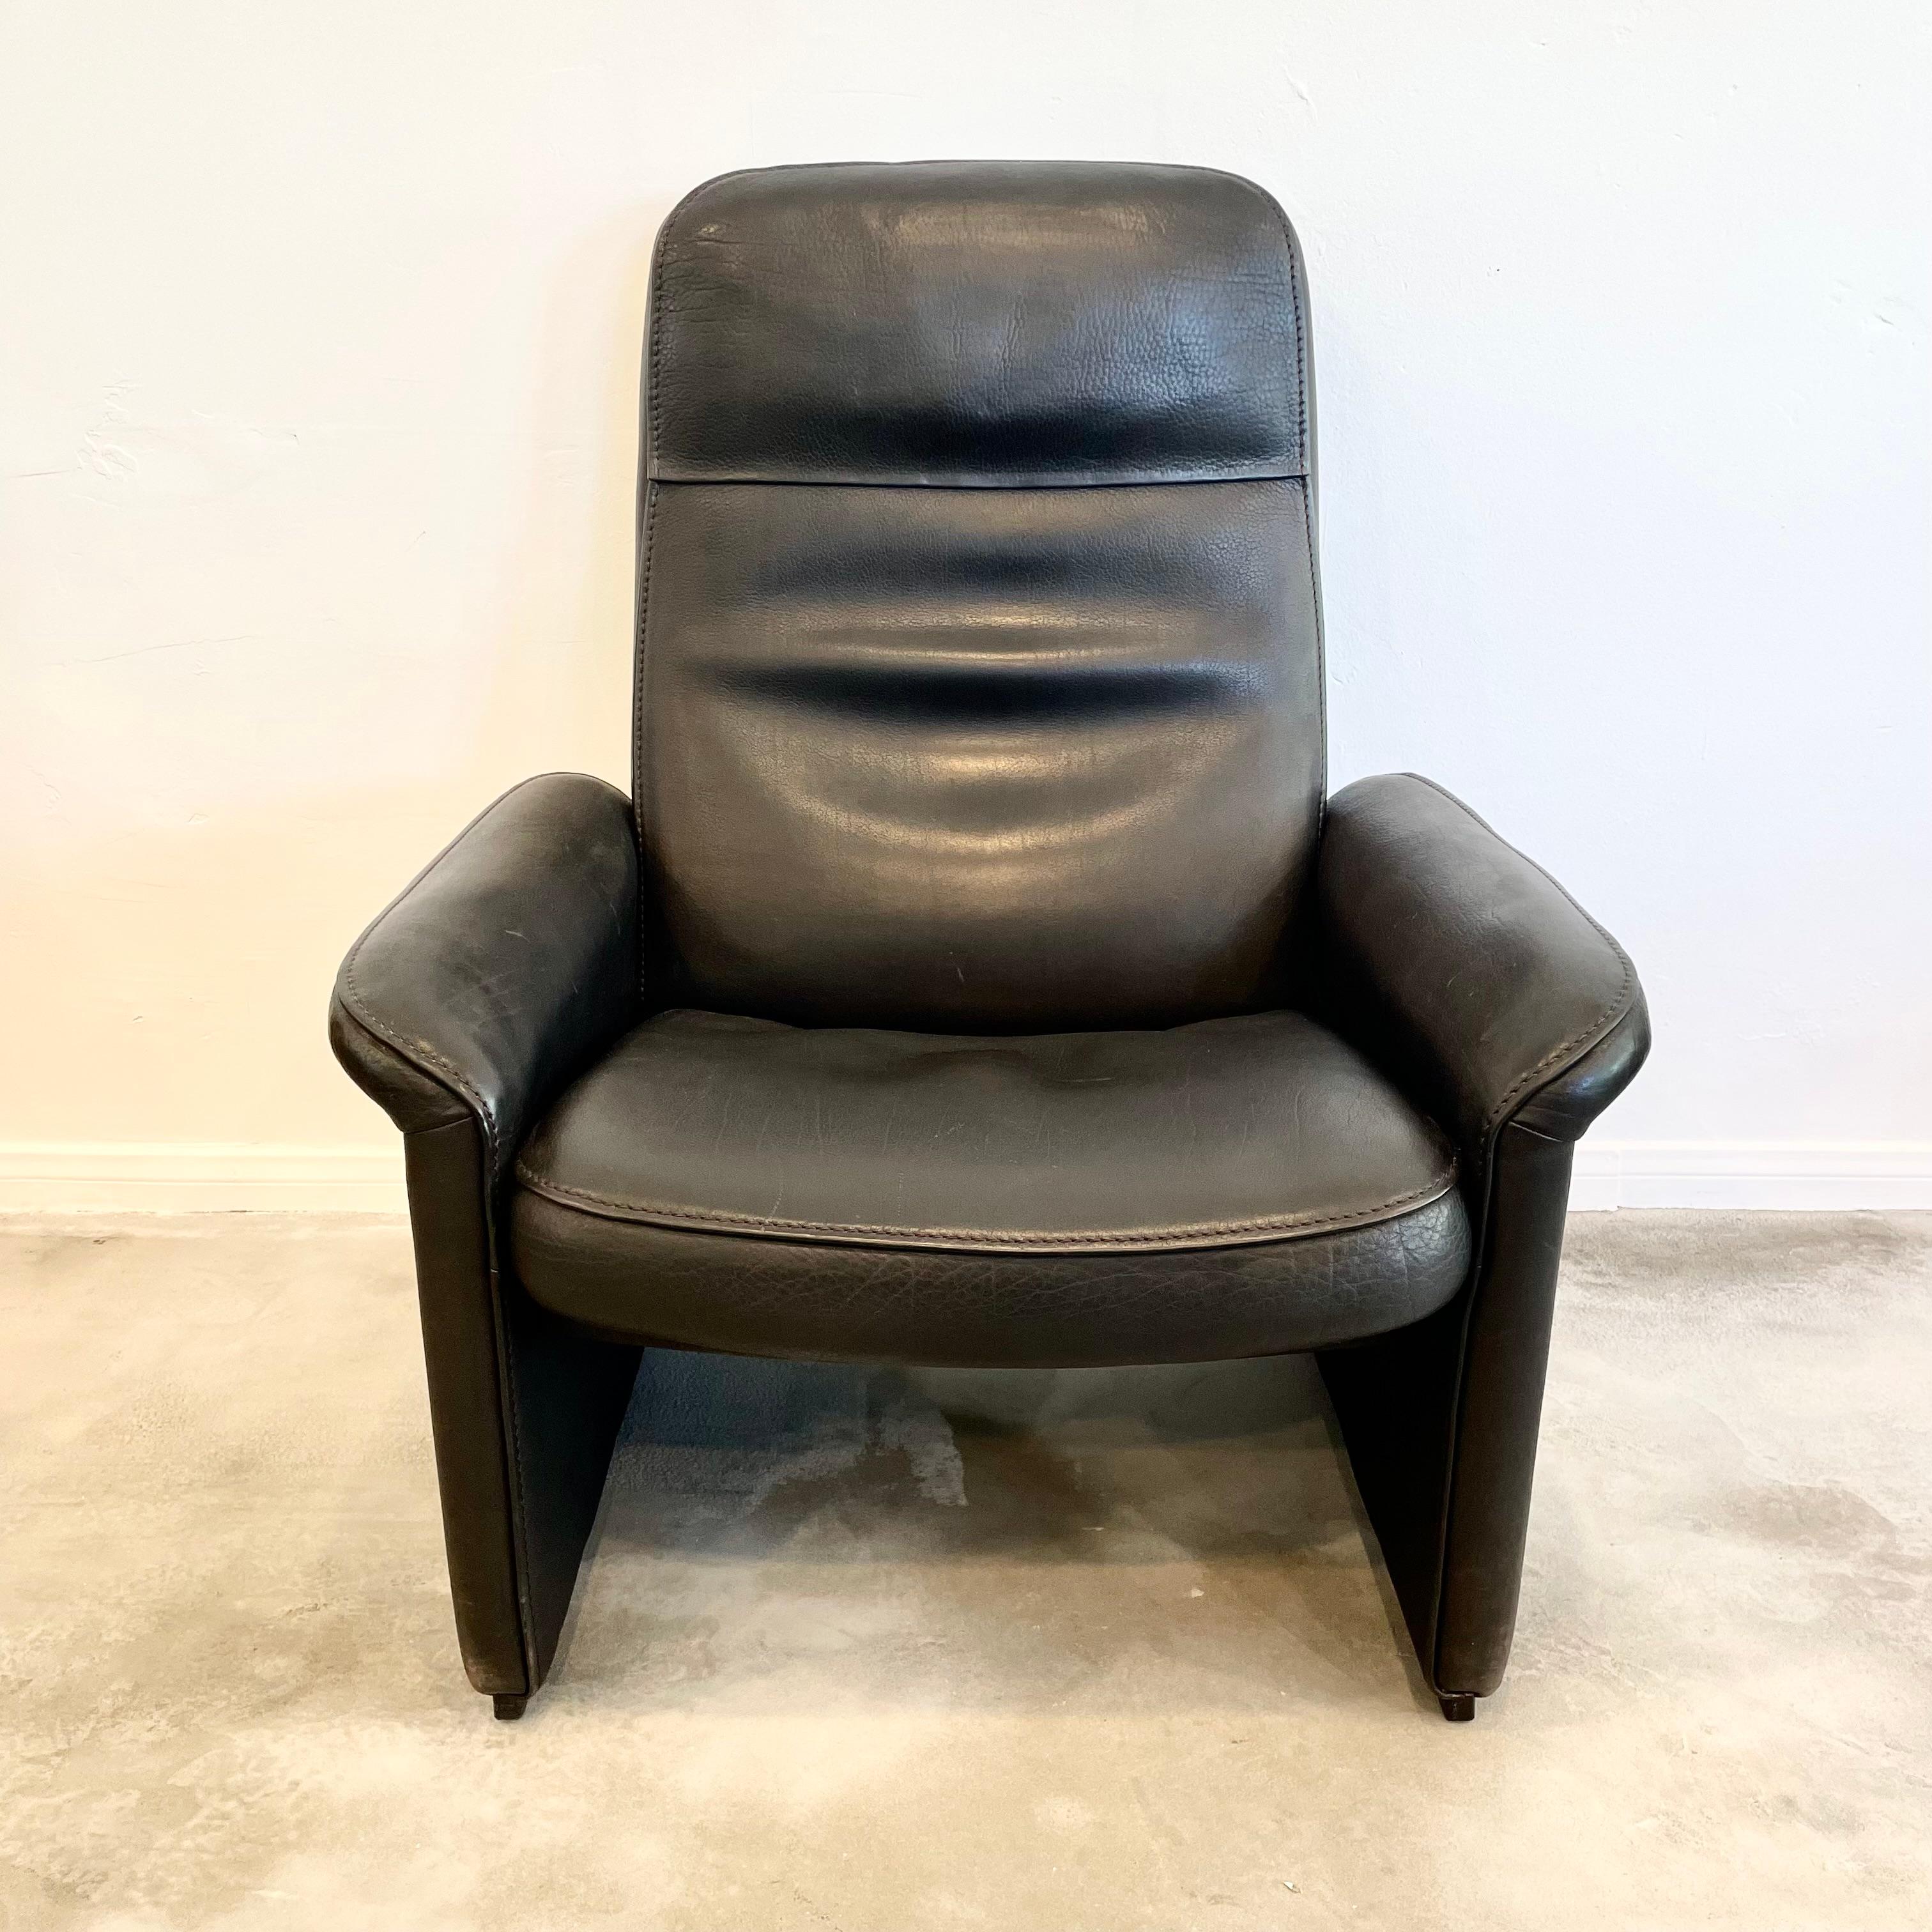 Executive lounge chair by De Sede made in the 1970s, Switzerland. Features a reclining mechanism allowing you to recline the chair almost flat if you choose. Extremely comfortable. This piece has a solid wooden frame with hand-stitched with black